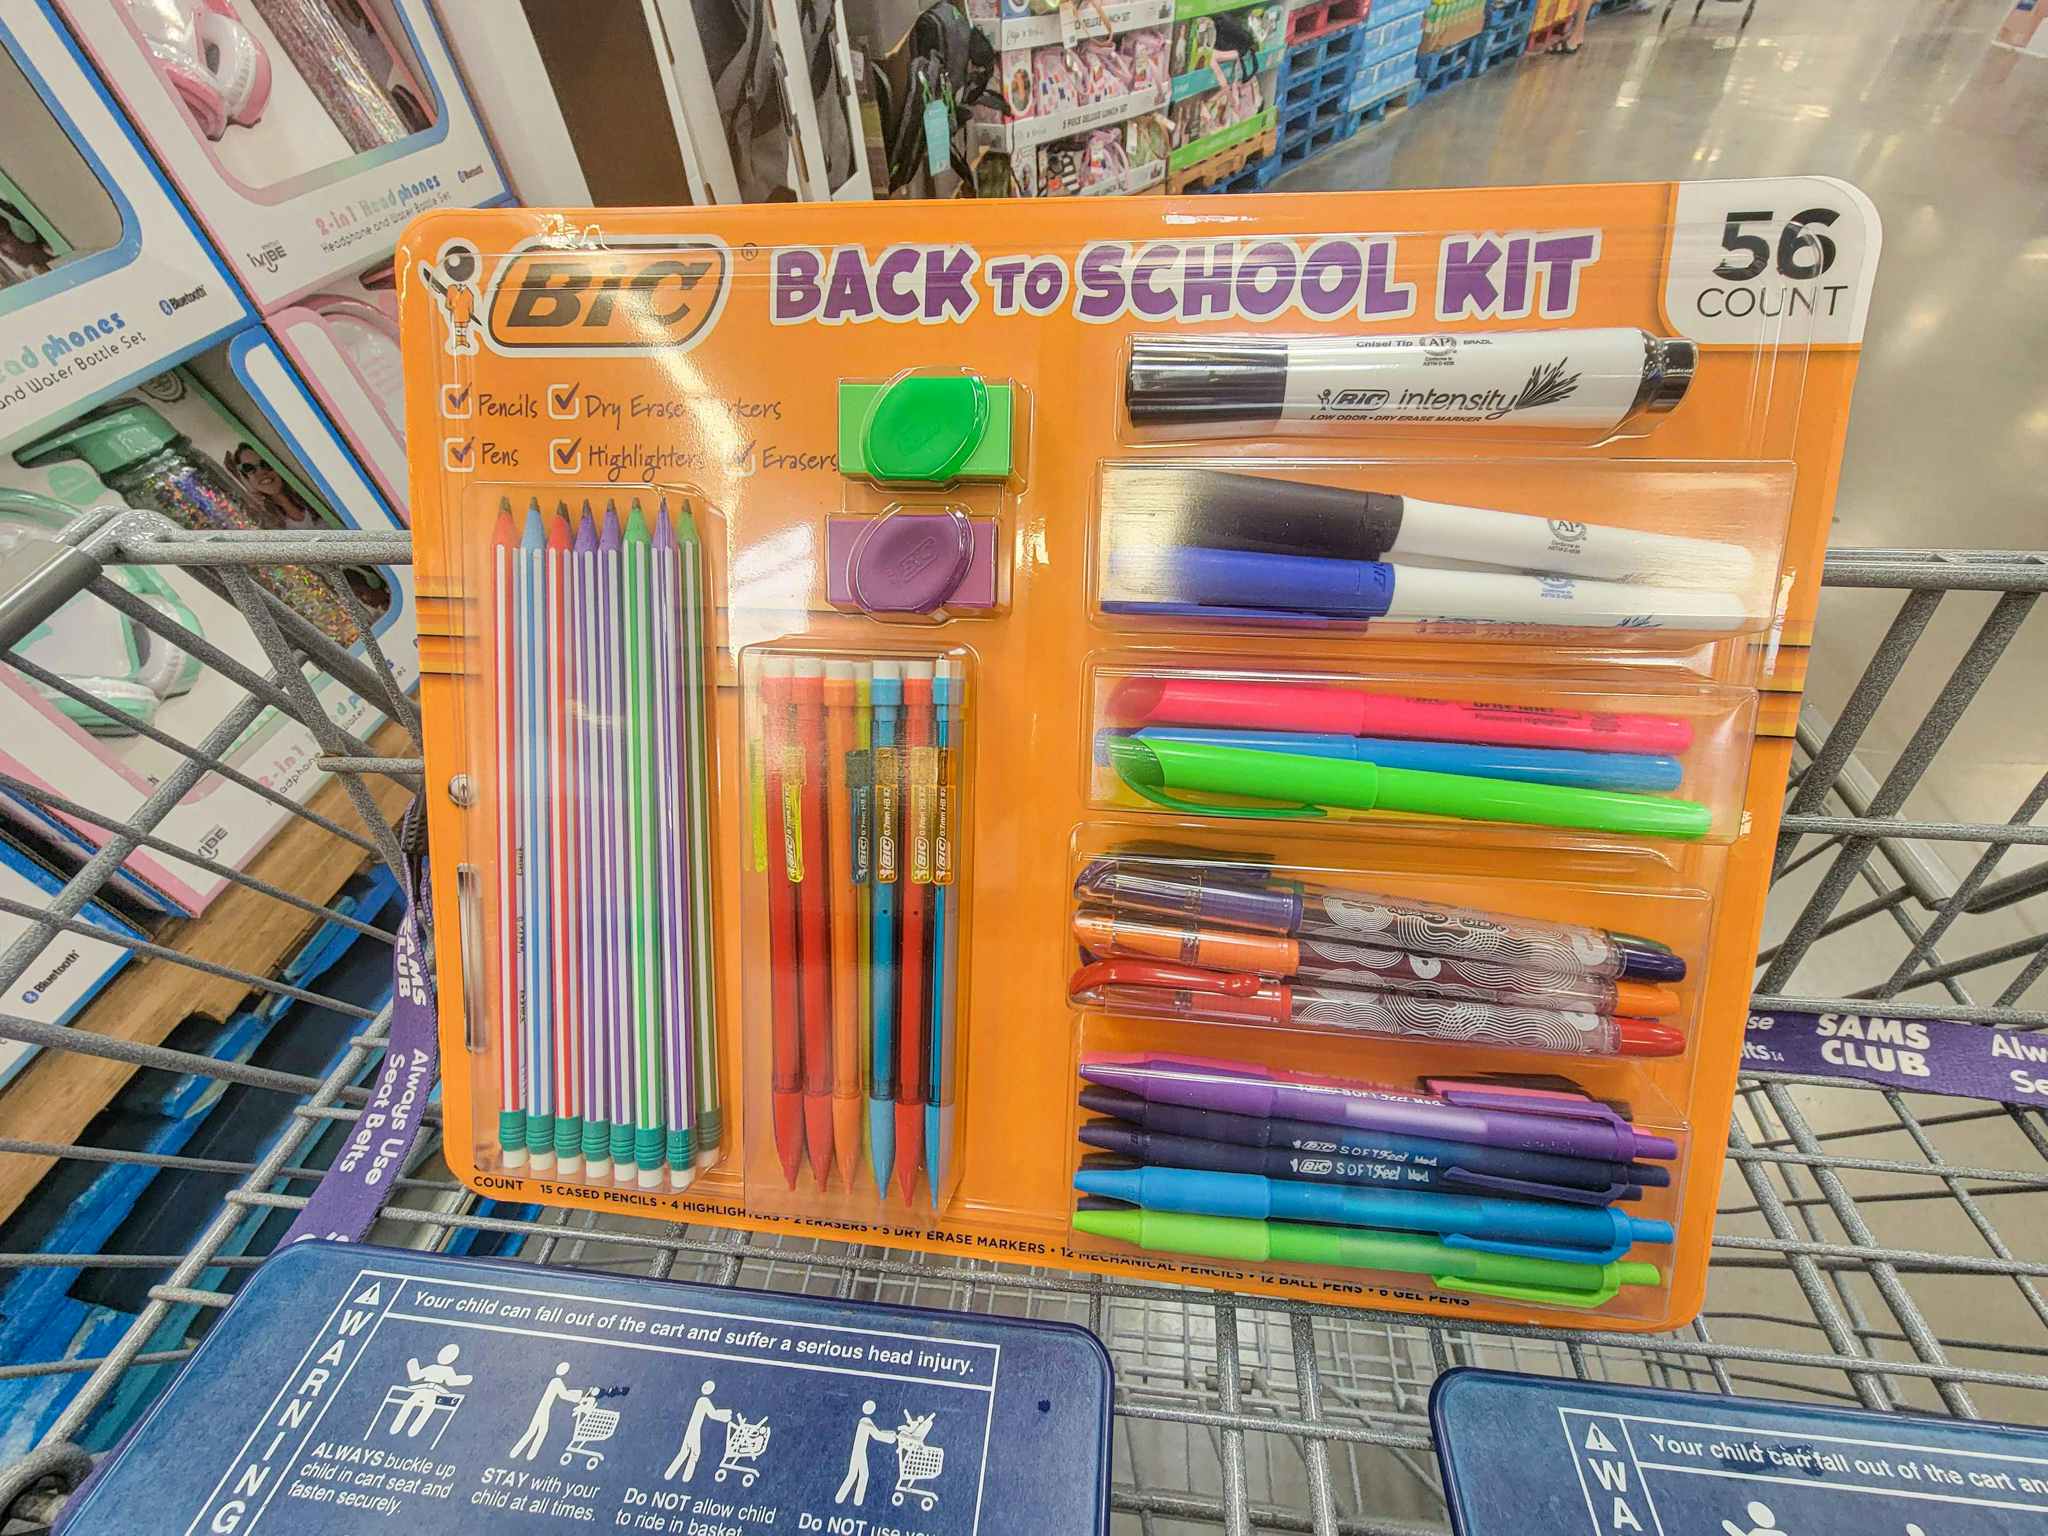 a bic back to school ultimate writing kit in a cart